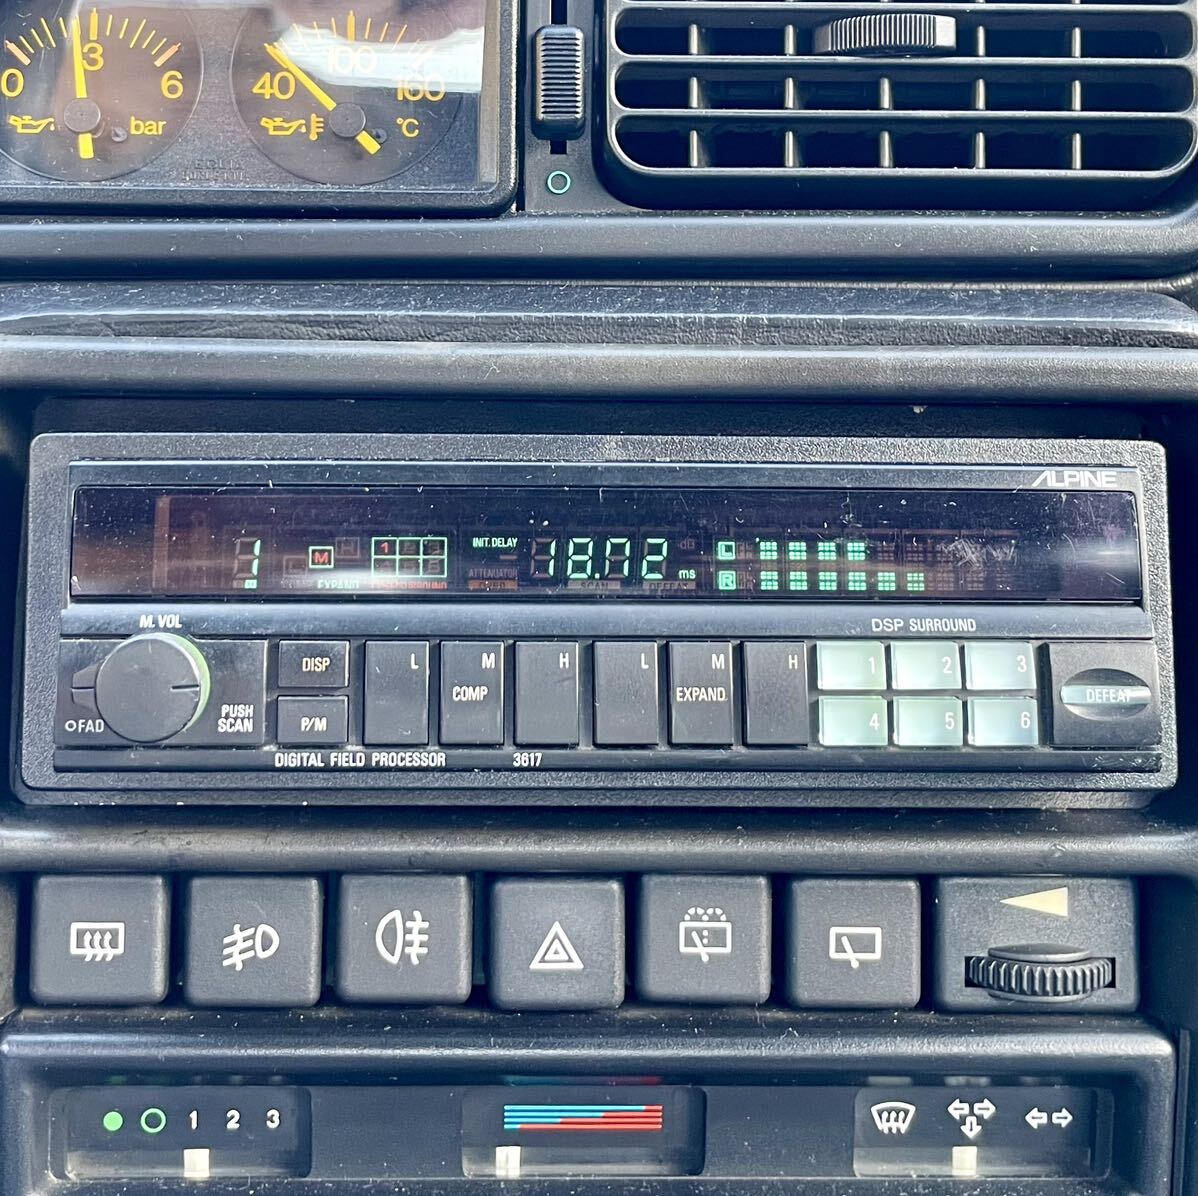 [1 jpy start prompt decision equipped ] rare that time thing ALPINE3617 DSP Surround manual attaching Alpine 1DIN equalizer 6. button green illumination key design 